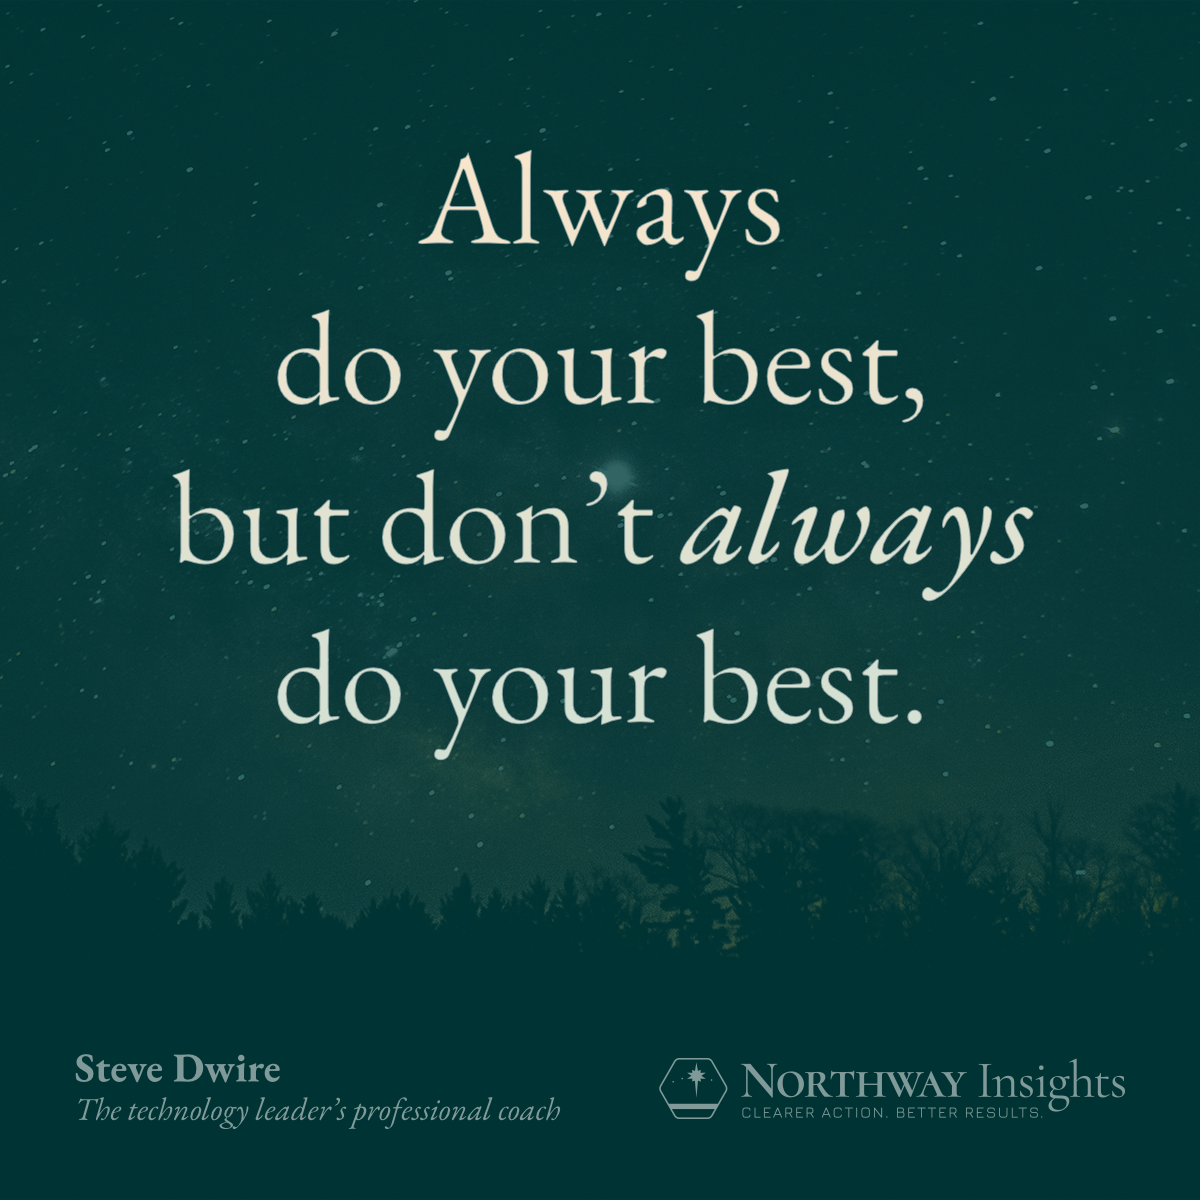 Always do your best, but don’t always do your best